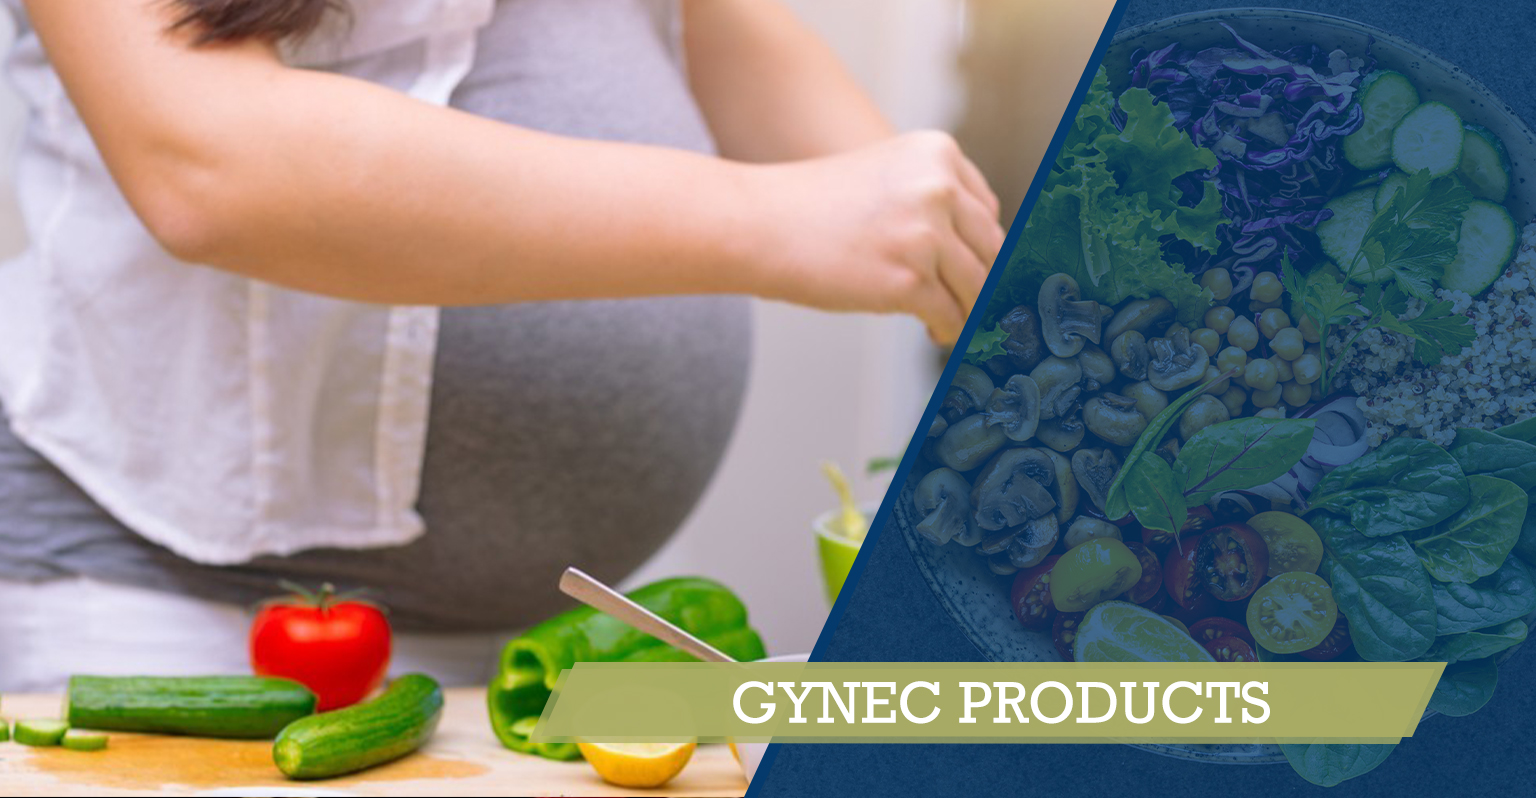 GYNEC PRODUCTS